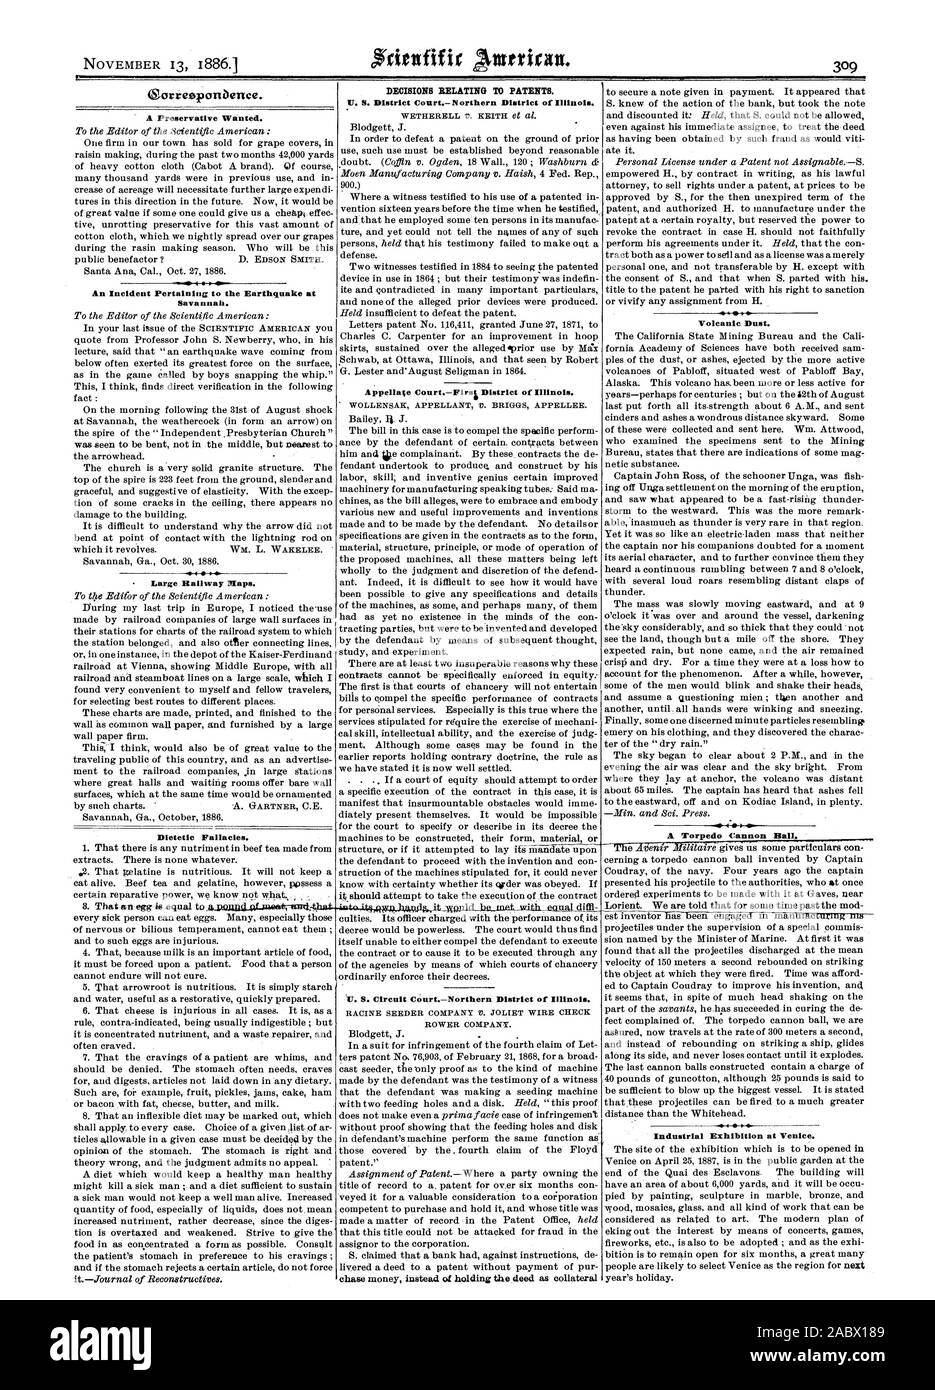 A Preservative Wanted. An Incident Pertaining to the Earthquake at Savannah. Large Railway Maps. Dietetic Fallacies. DECISIONS RELATING TO PATENTS. U. S. District Court.- Northern District of Illinois. Appellate Court.-Firs District of Illinois. WOLLENSAK APPELLANT V. BRIGGS APPELLEE. V. S. Circuit Court.-Northern District of Illinois. RACINE SEEDER COMPANY V. JOLIET WIRE CHECK ROWER COMPANY. Volcanic Dust.  1 1 1 A Torpedo Cannon Ball. Industrial Exhibition at Venice., scientific american, 1886-11-13 Stock Photo